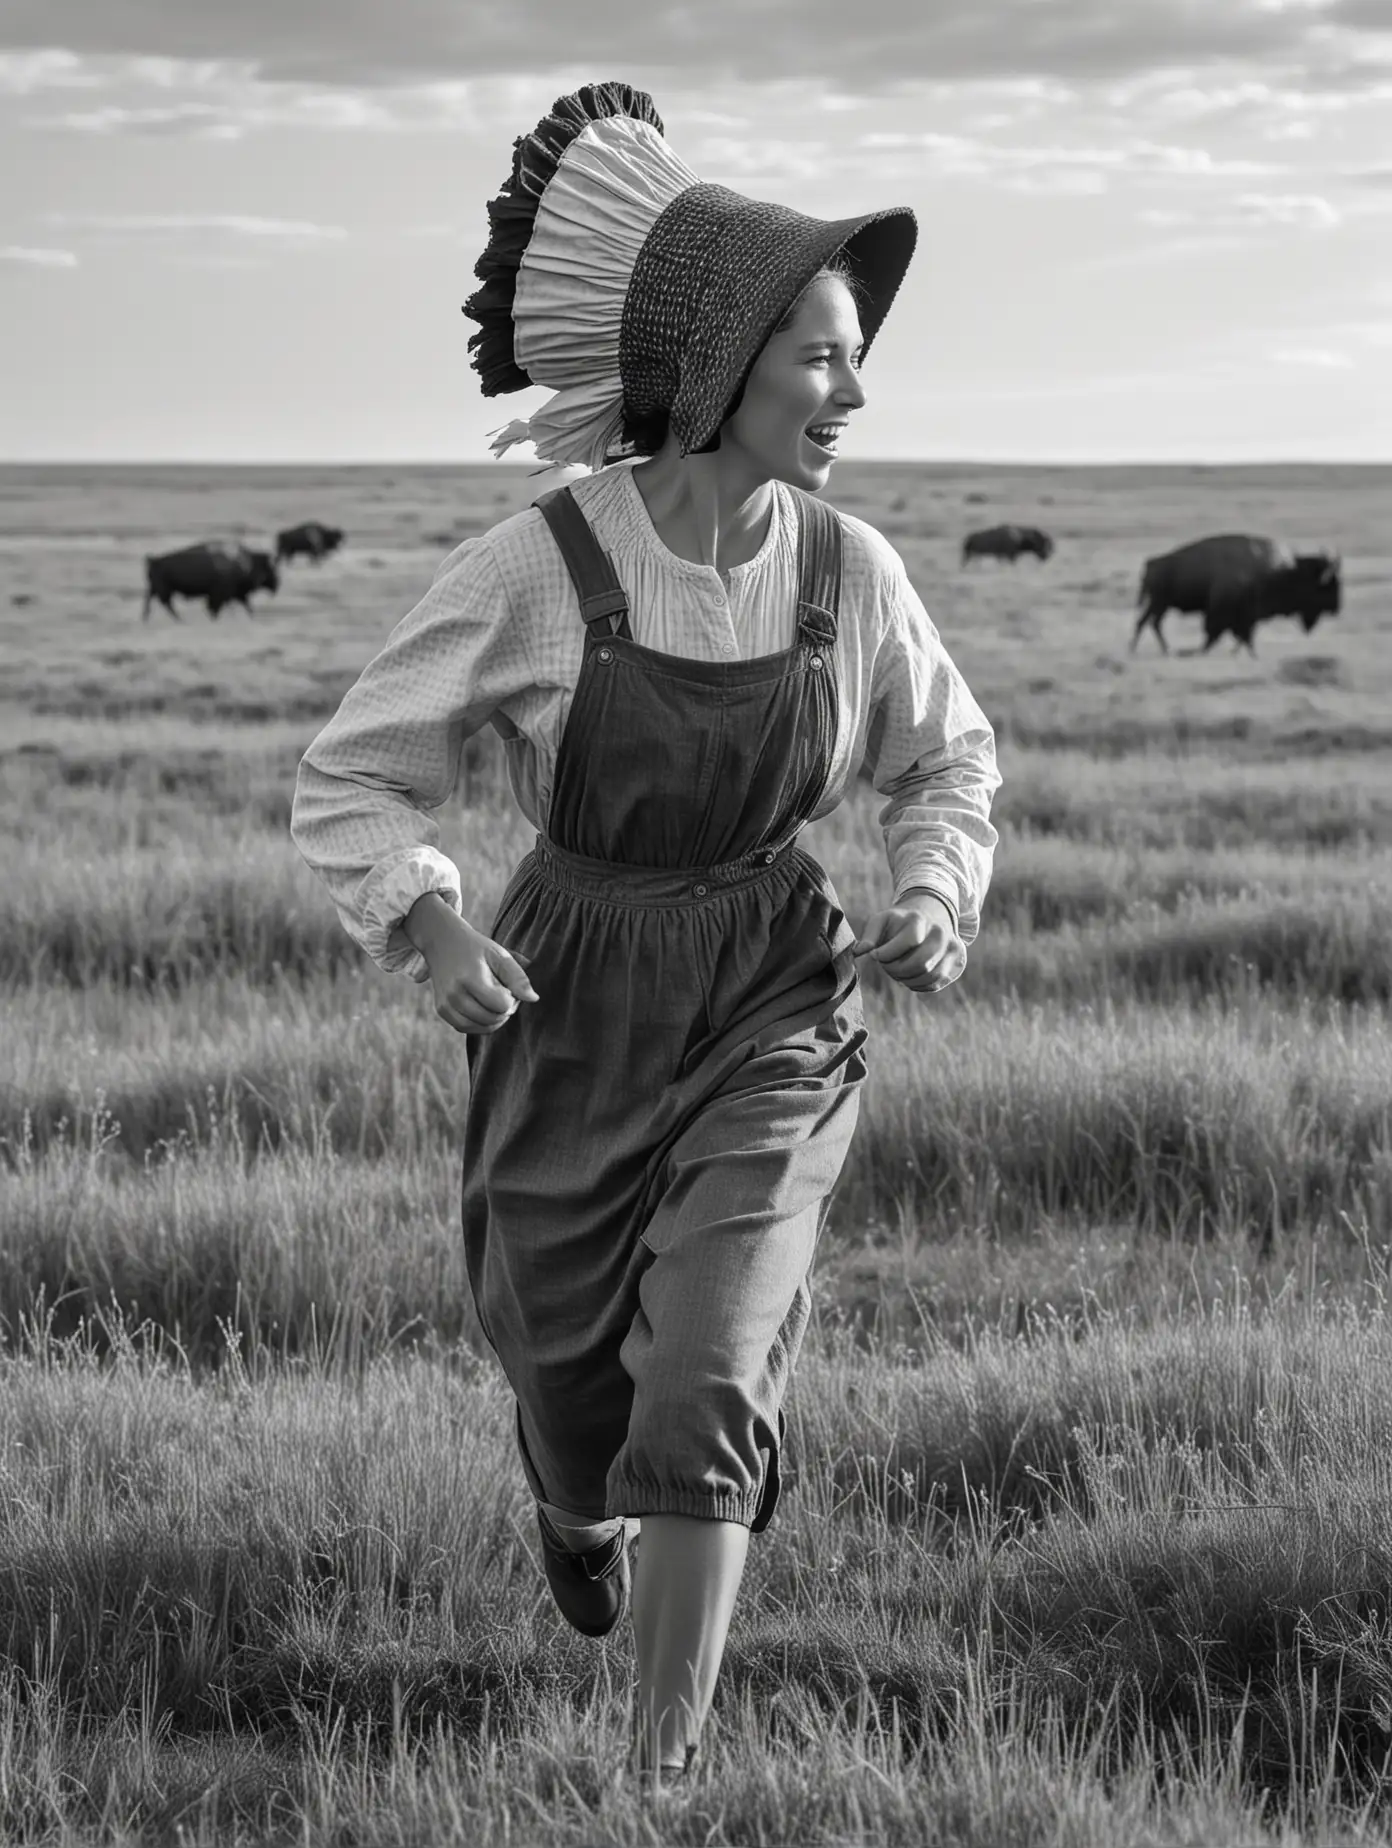 Pioneer Woman Running Through Prairie Landscape with Buffalo in Black and White